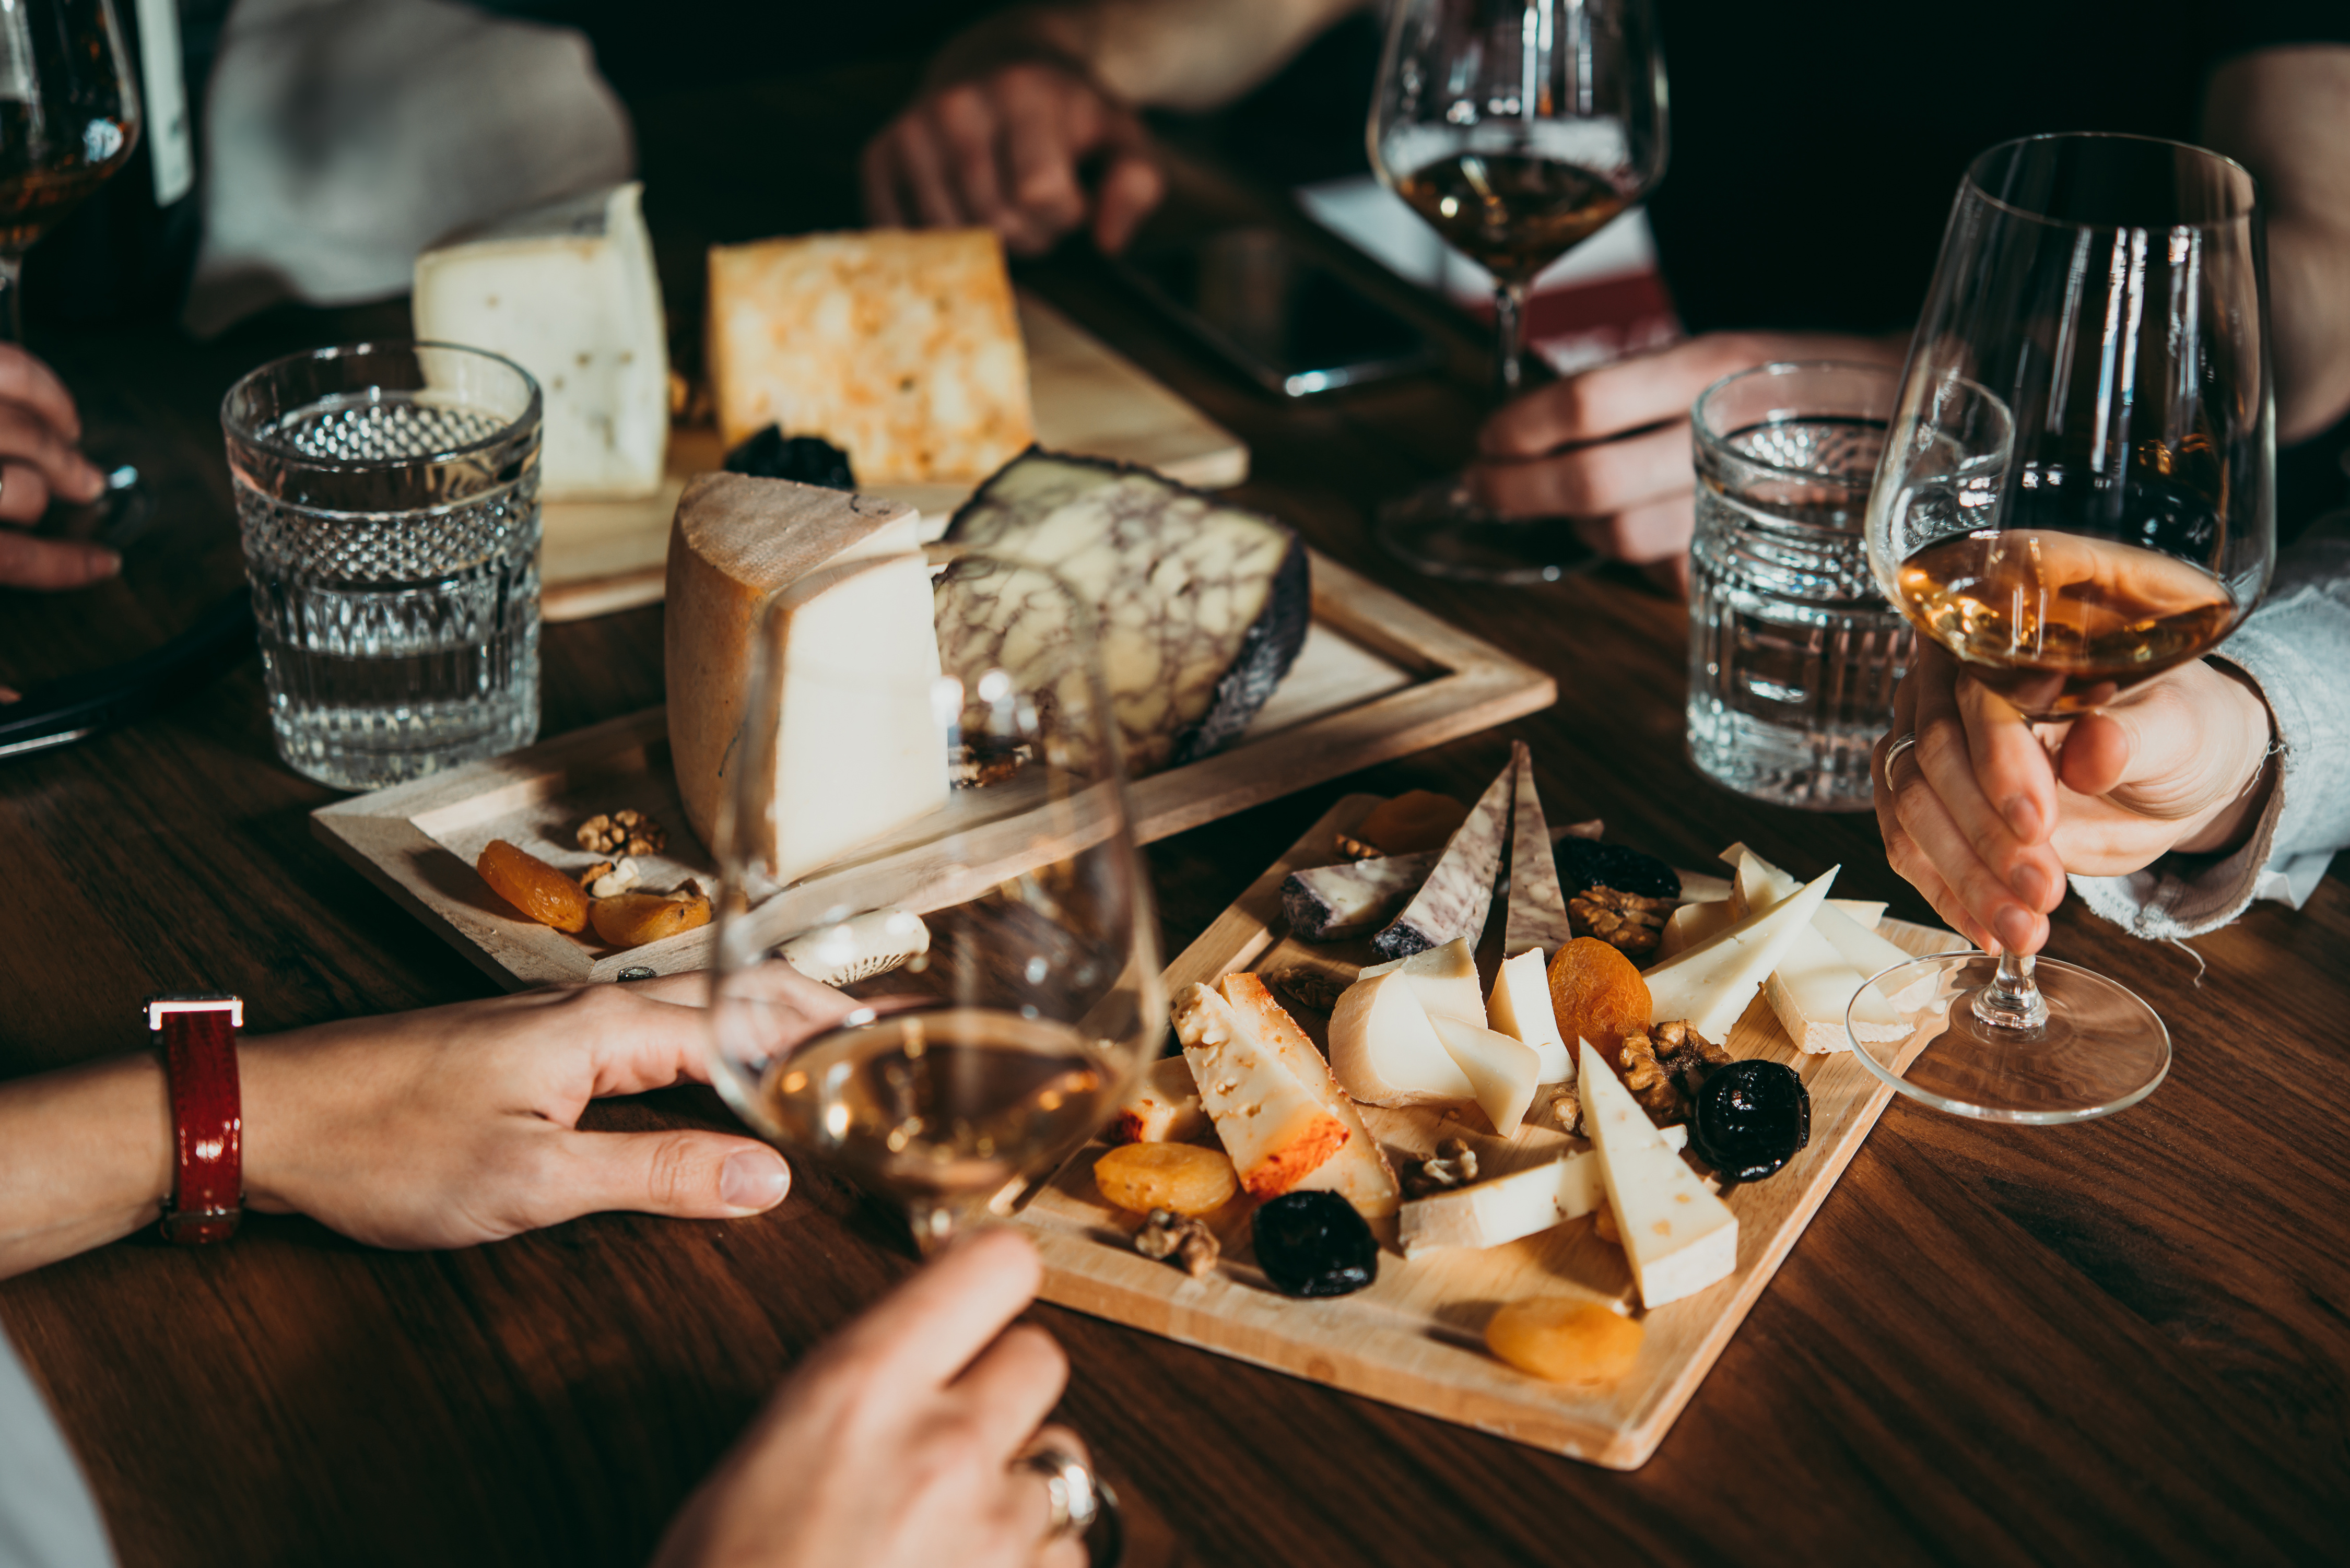 Wine and cheese served for a friendly party in a bar or a restaurant